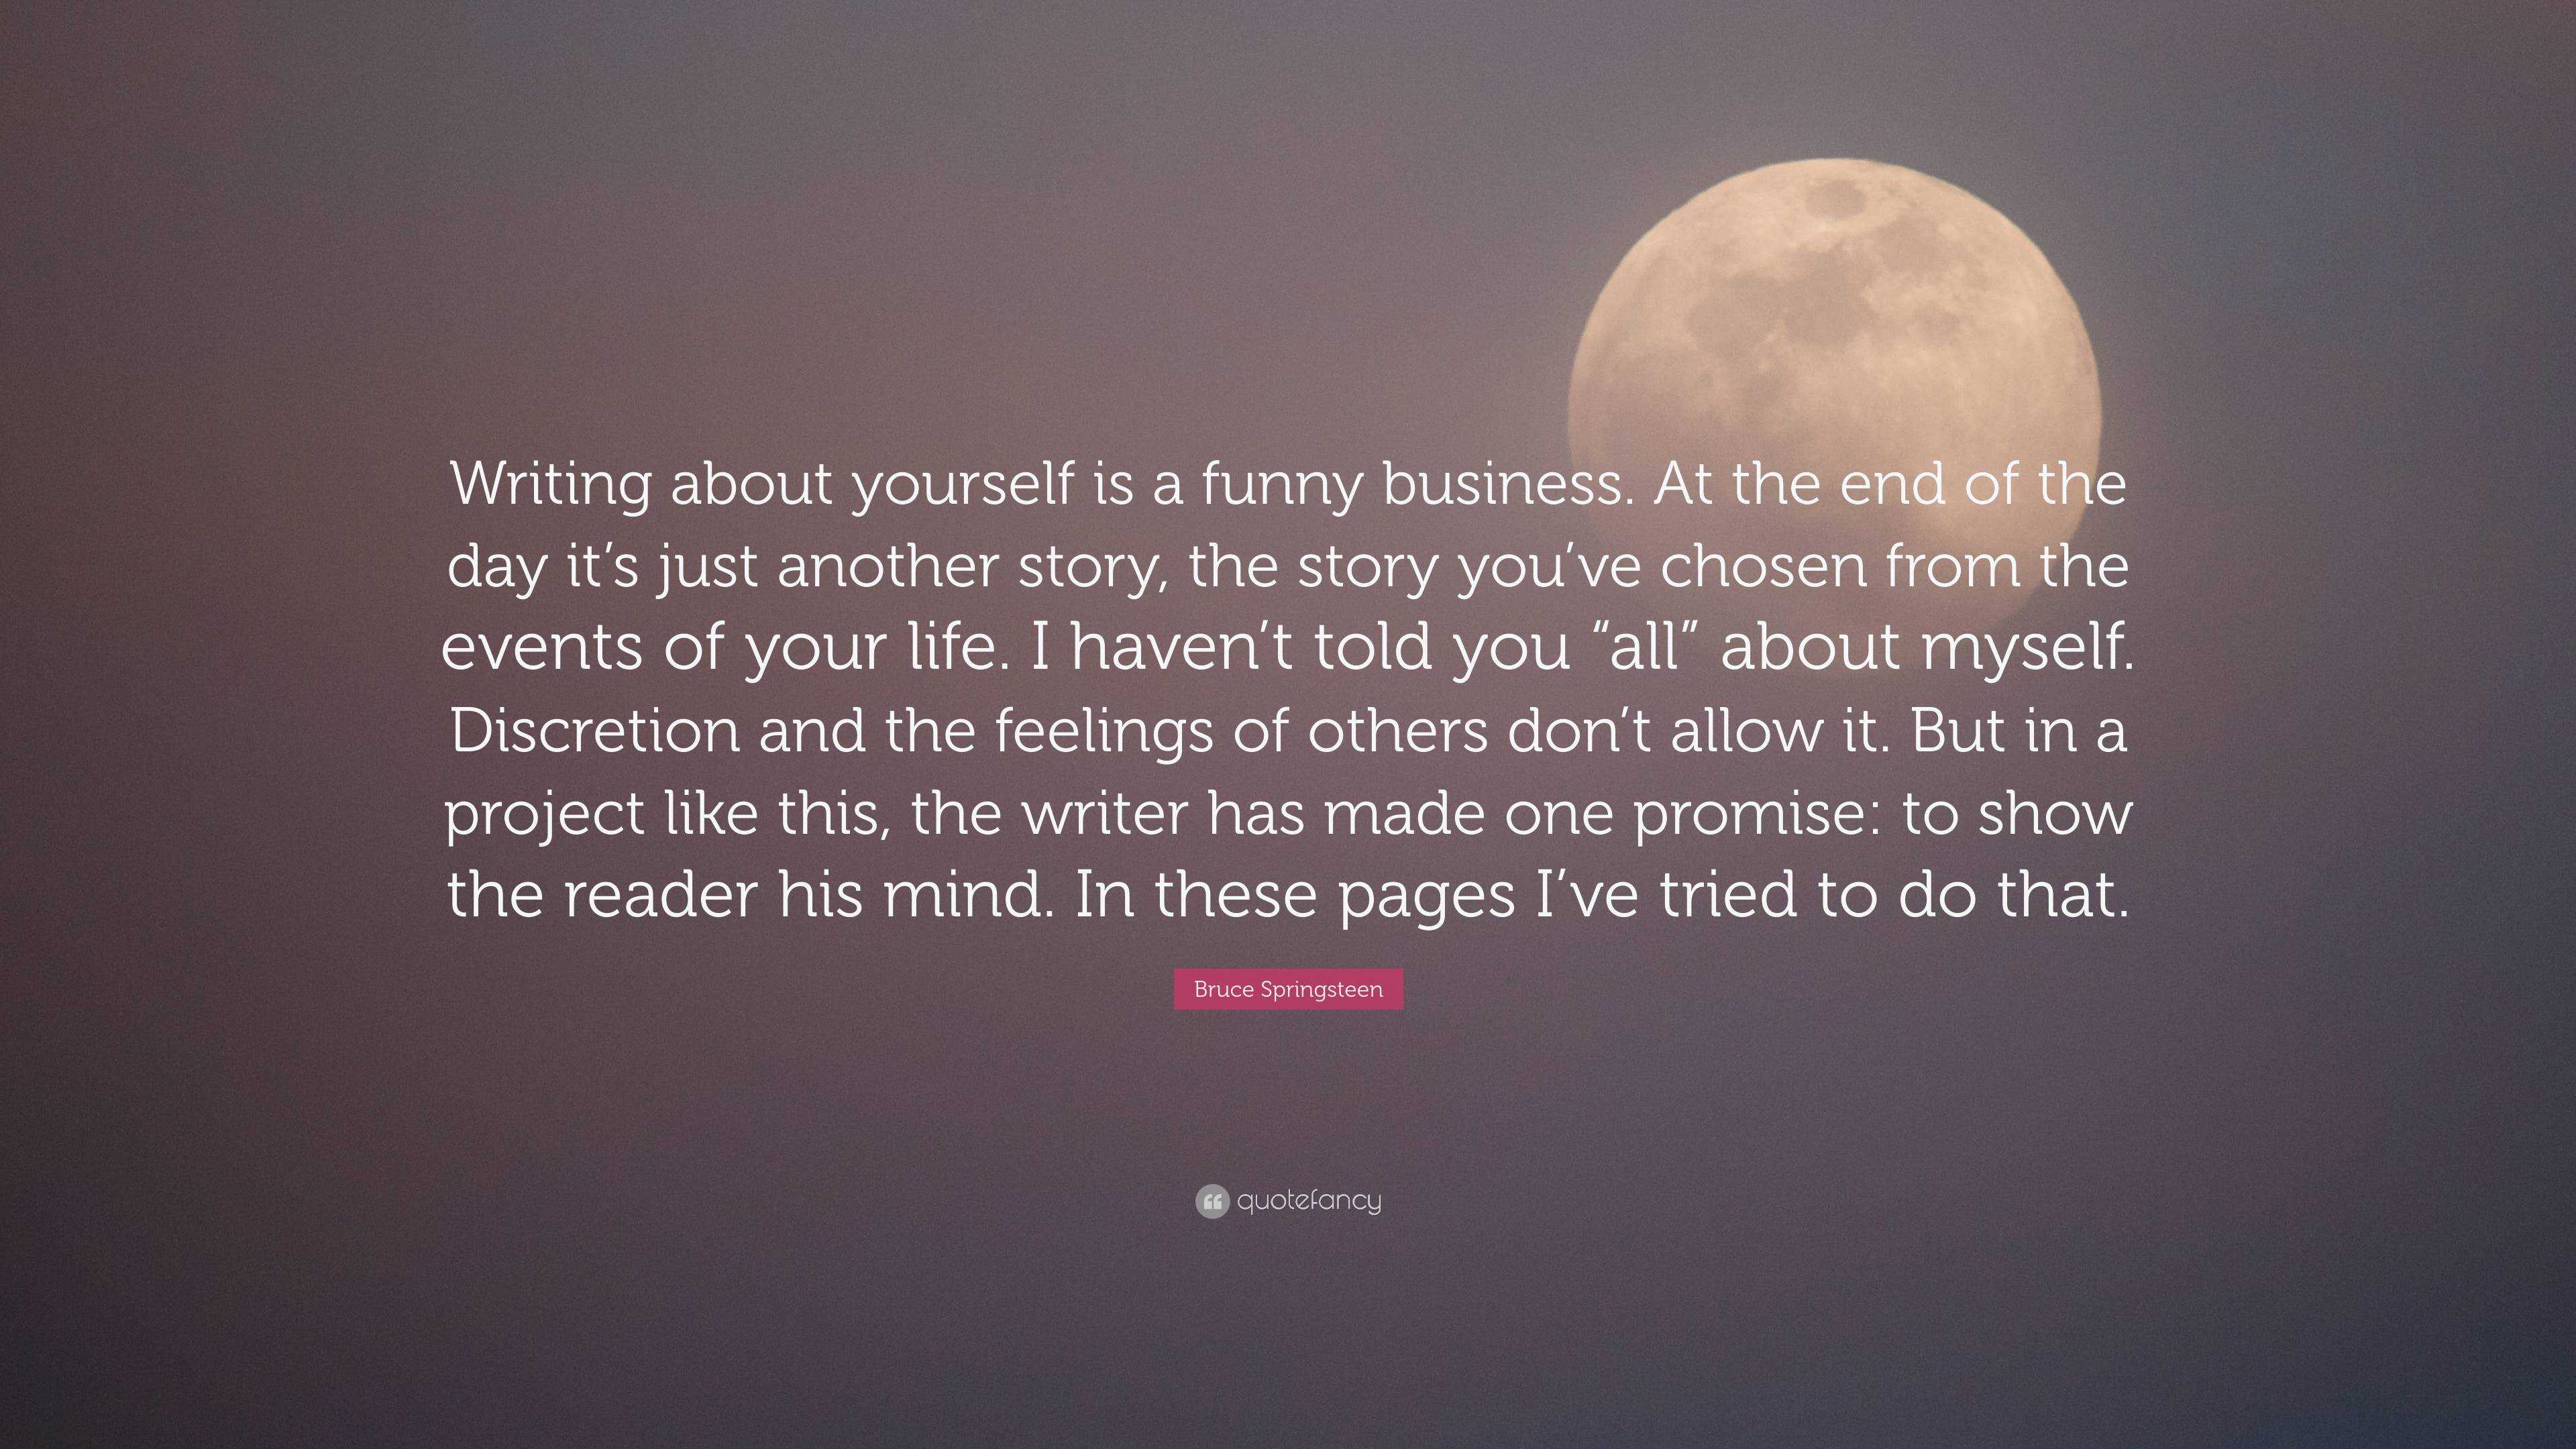 Bruce Springsteen Quote: “Writing about yourself is a funny business. At  the end of the day it's just another story, the story you've chosen from  ...”